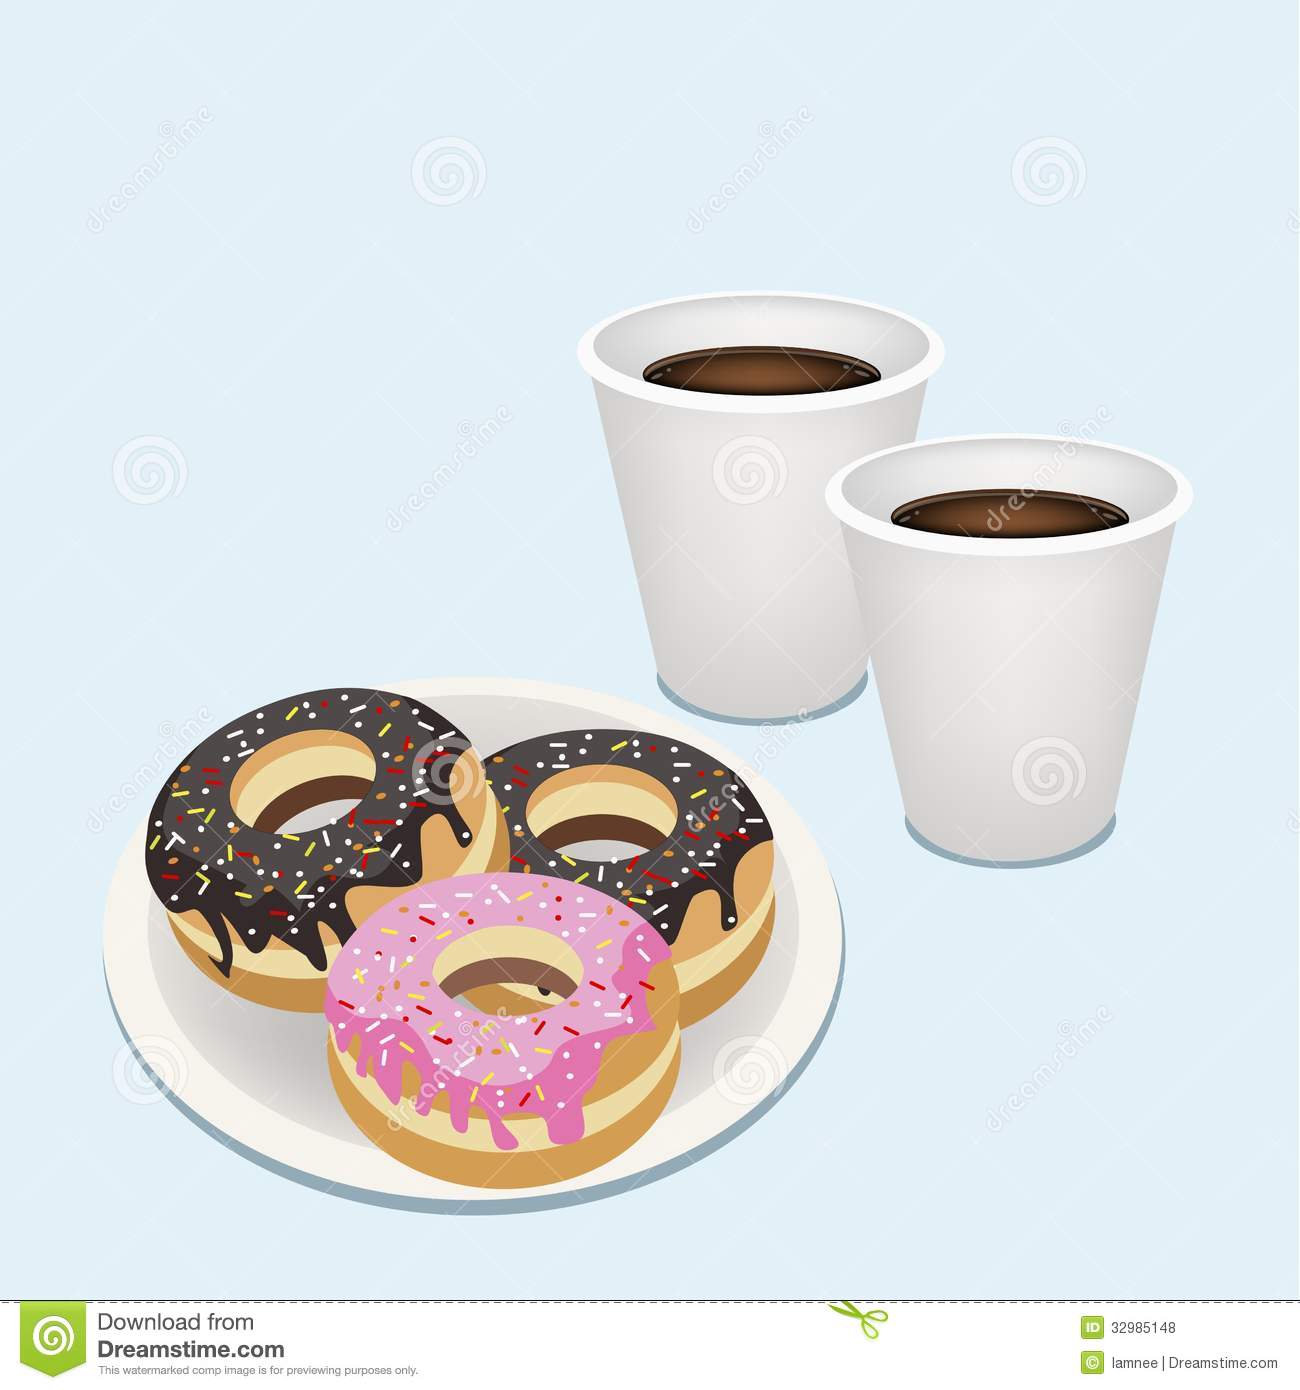 Coffee and donuts clipart fre